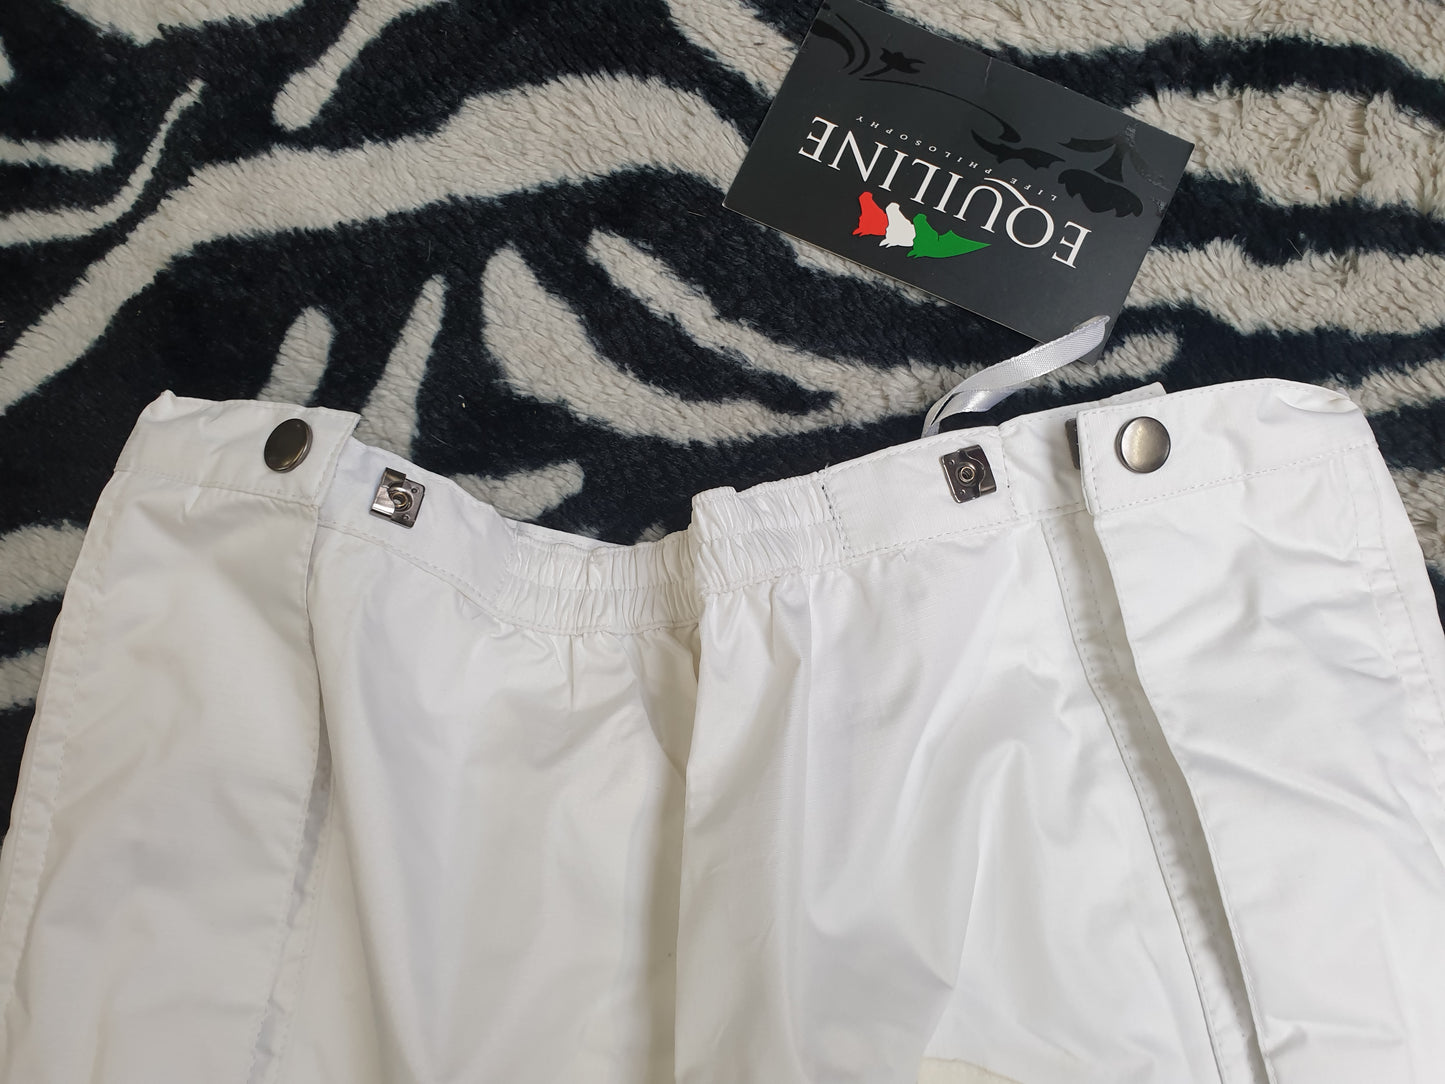 NEW equiline waterproof over breeches, size x small, white FREE POSTAGE 🟢